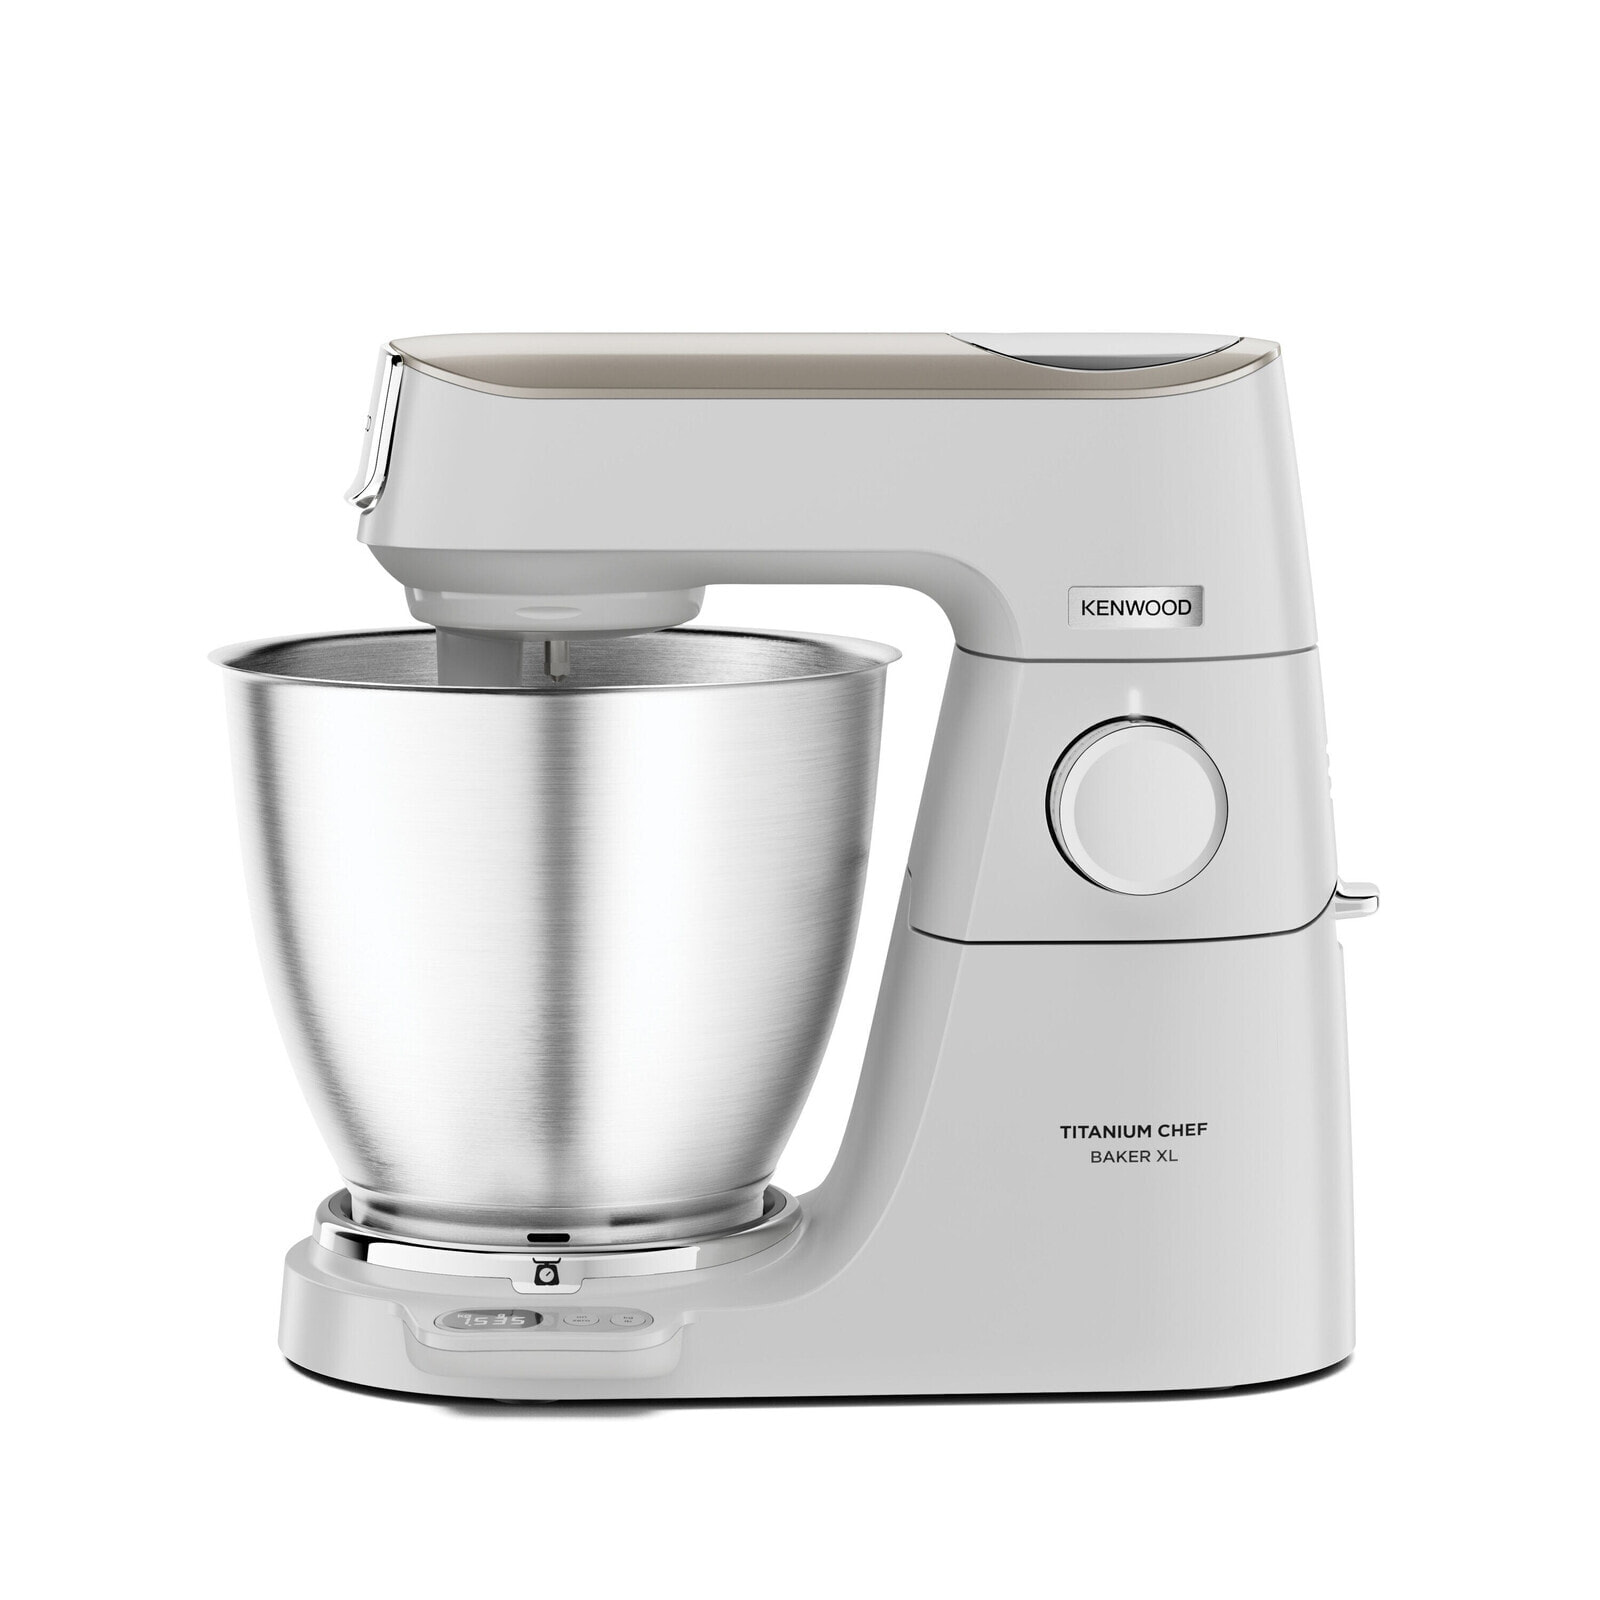 Kenwood KVL65.001.WH - Stand mixer - White - Mixing - 7 L - Metal - Stainless steel